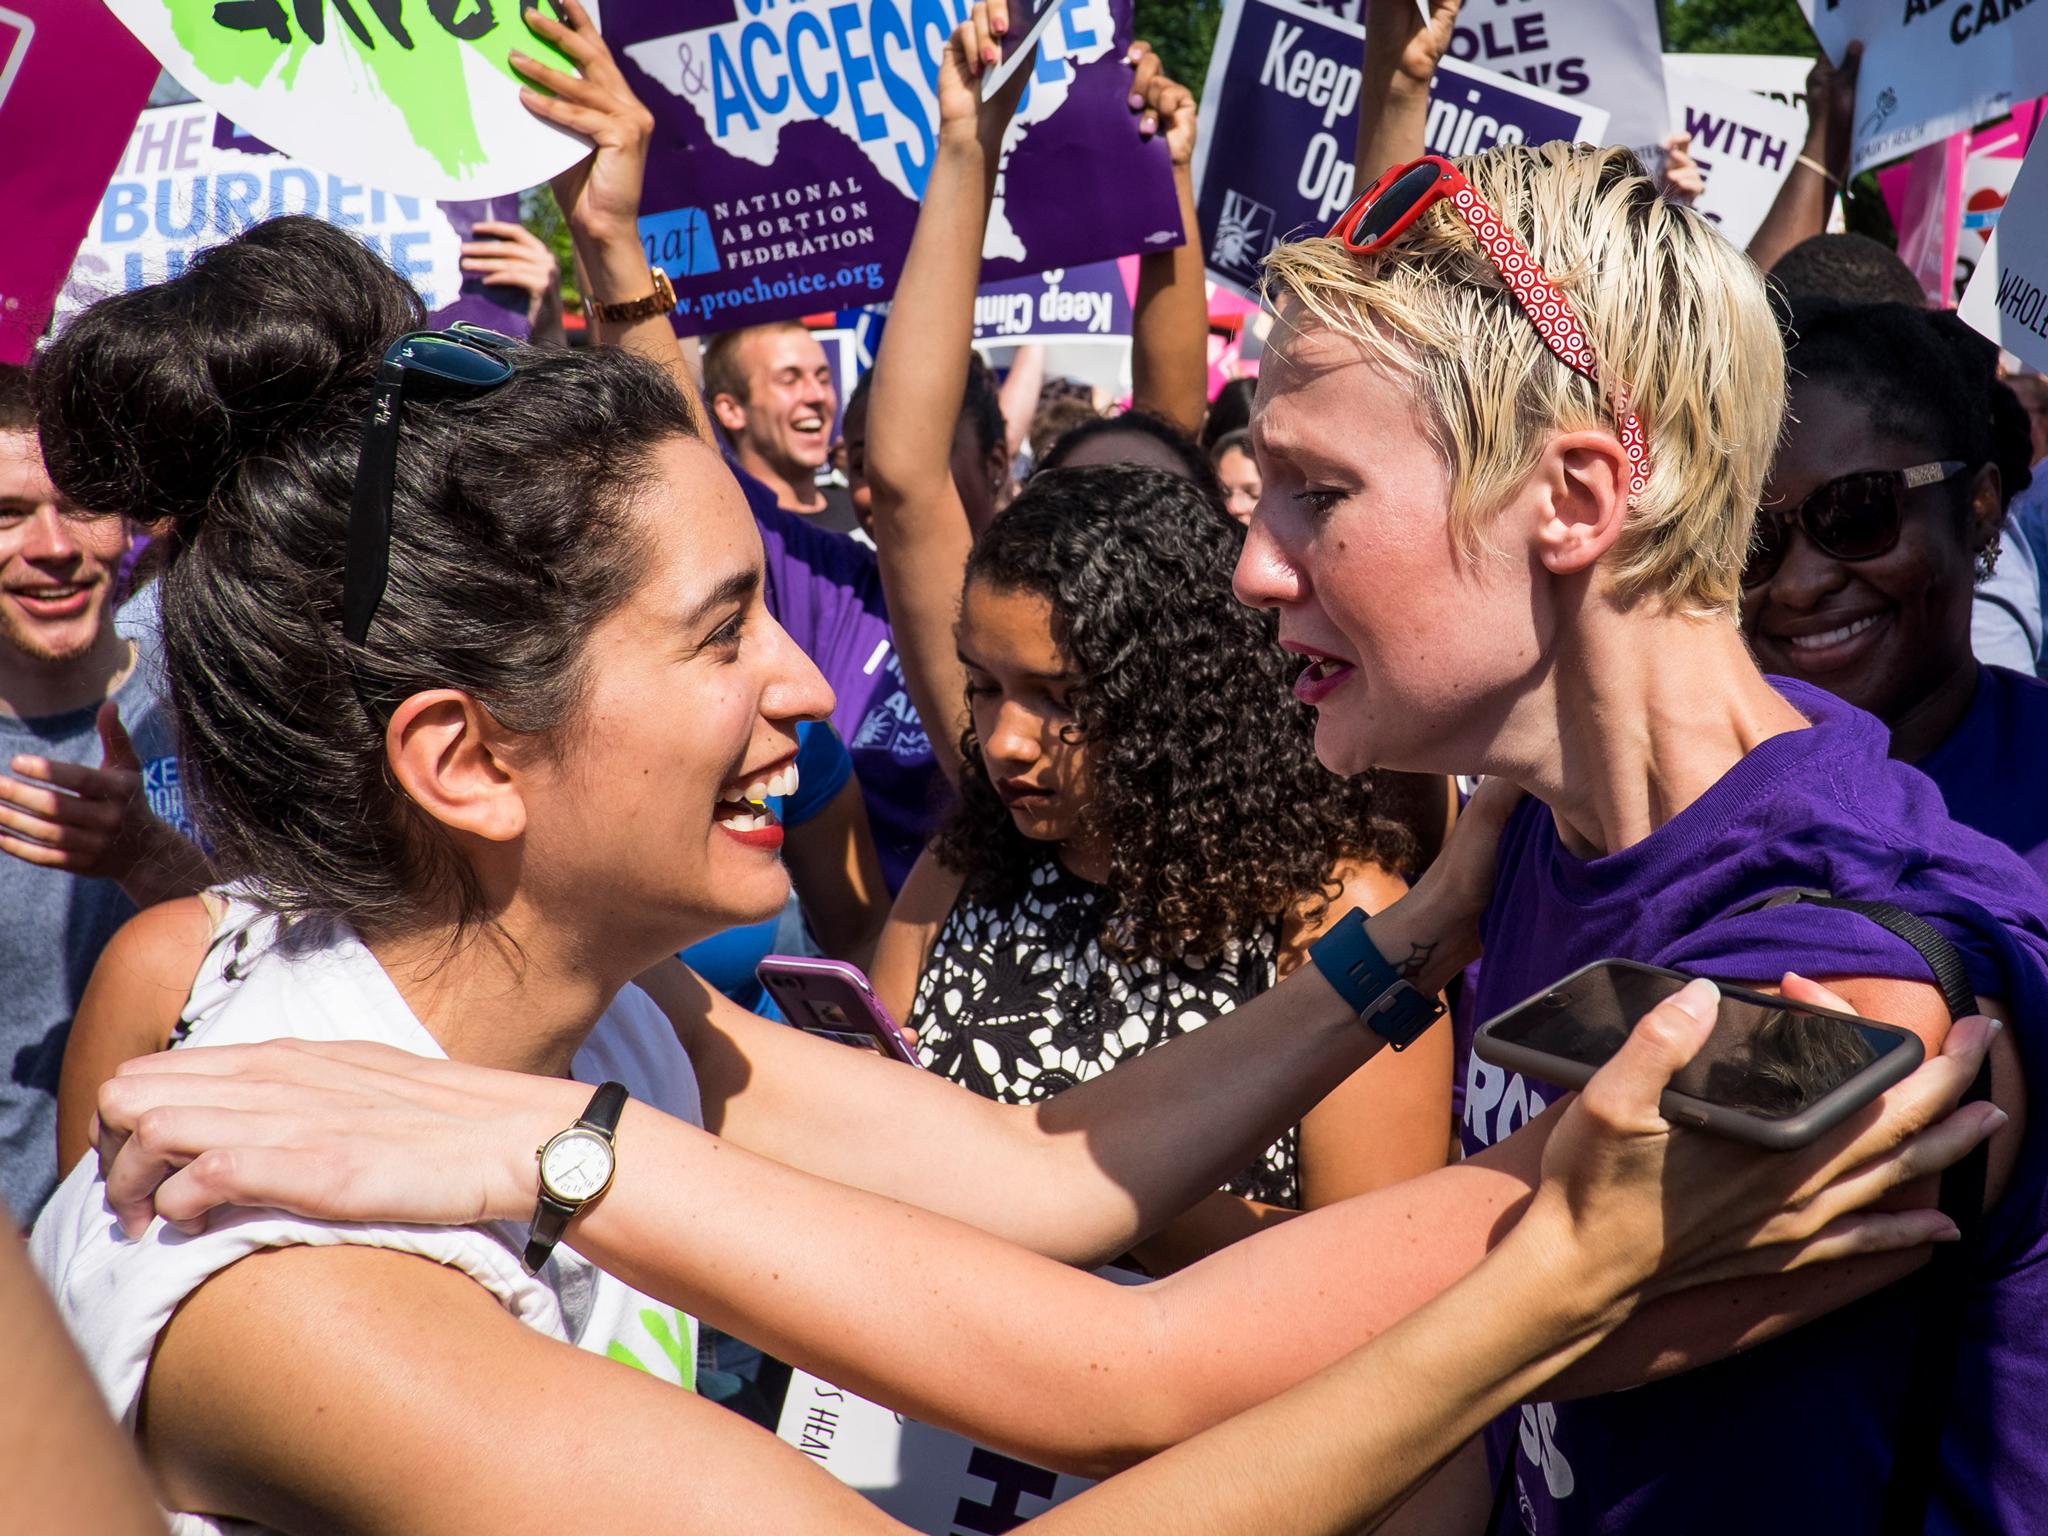 Abortion rights activists celebrating after the Supreme Court struck down Texas' restrictive HB2 law